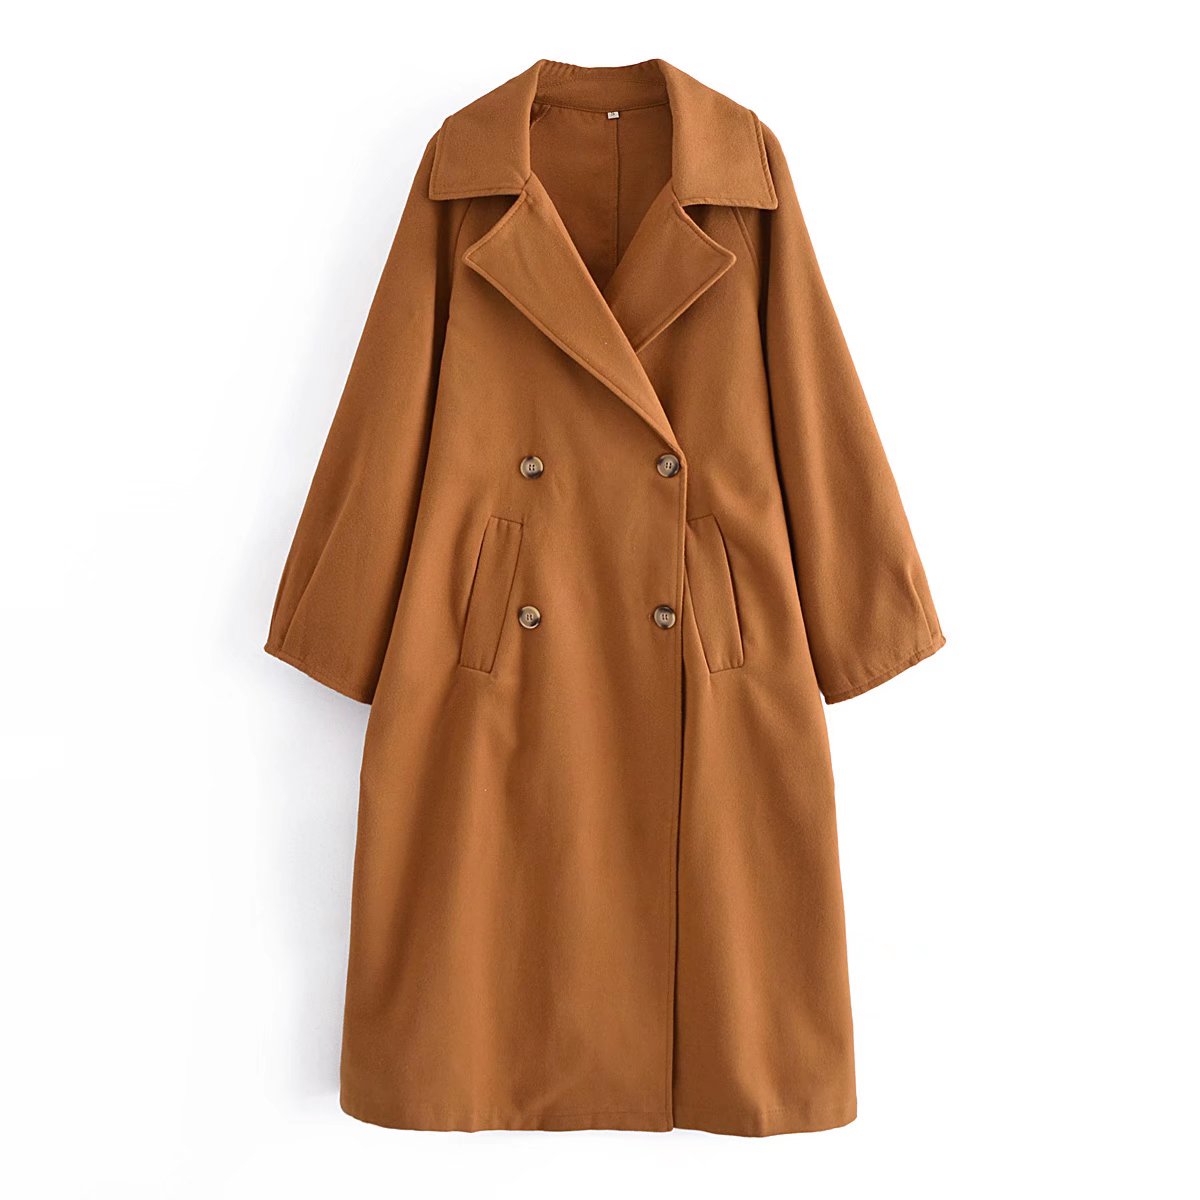 OOTDGIRL Women 2022 Autumn New Caramel Colour Long Section Jacket Overcoat Vintage Long Sleeve Double Breasted Female Outerwear Chic Tops